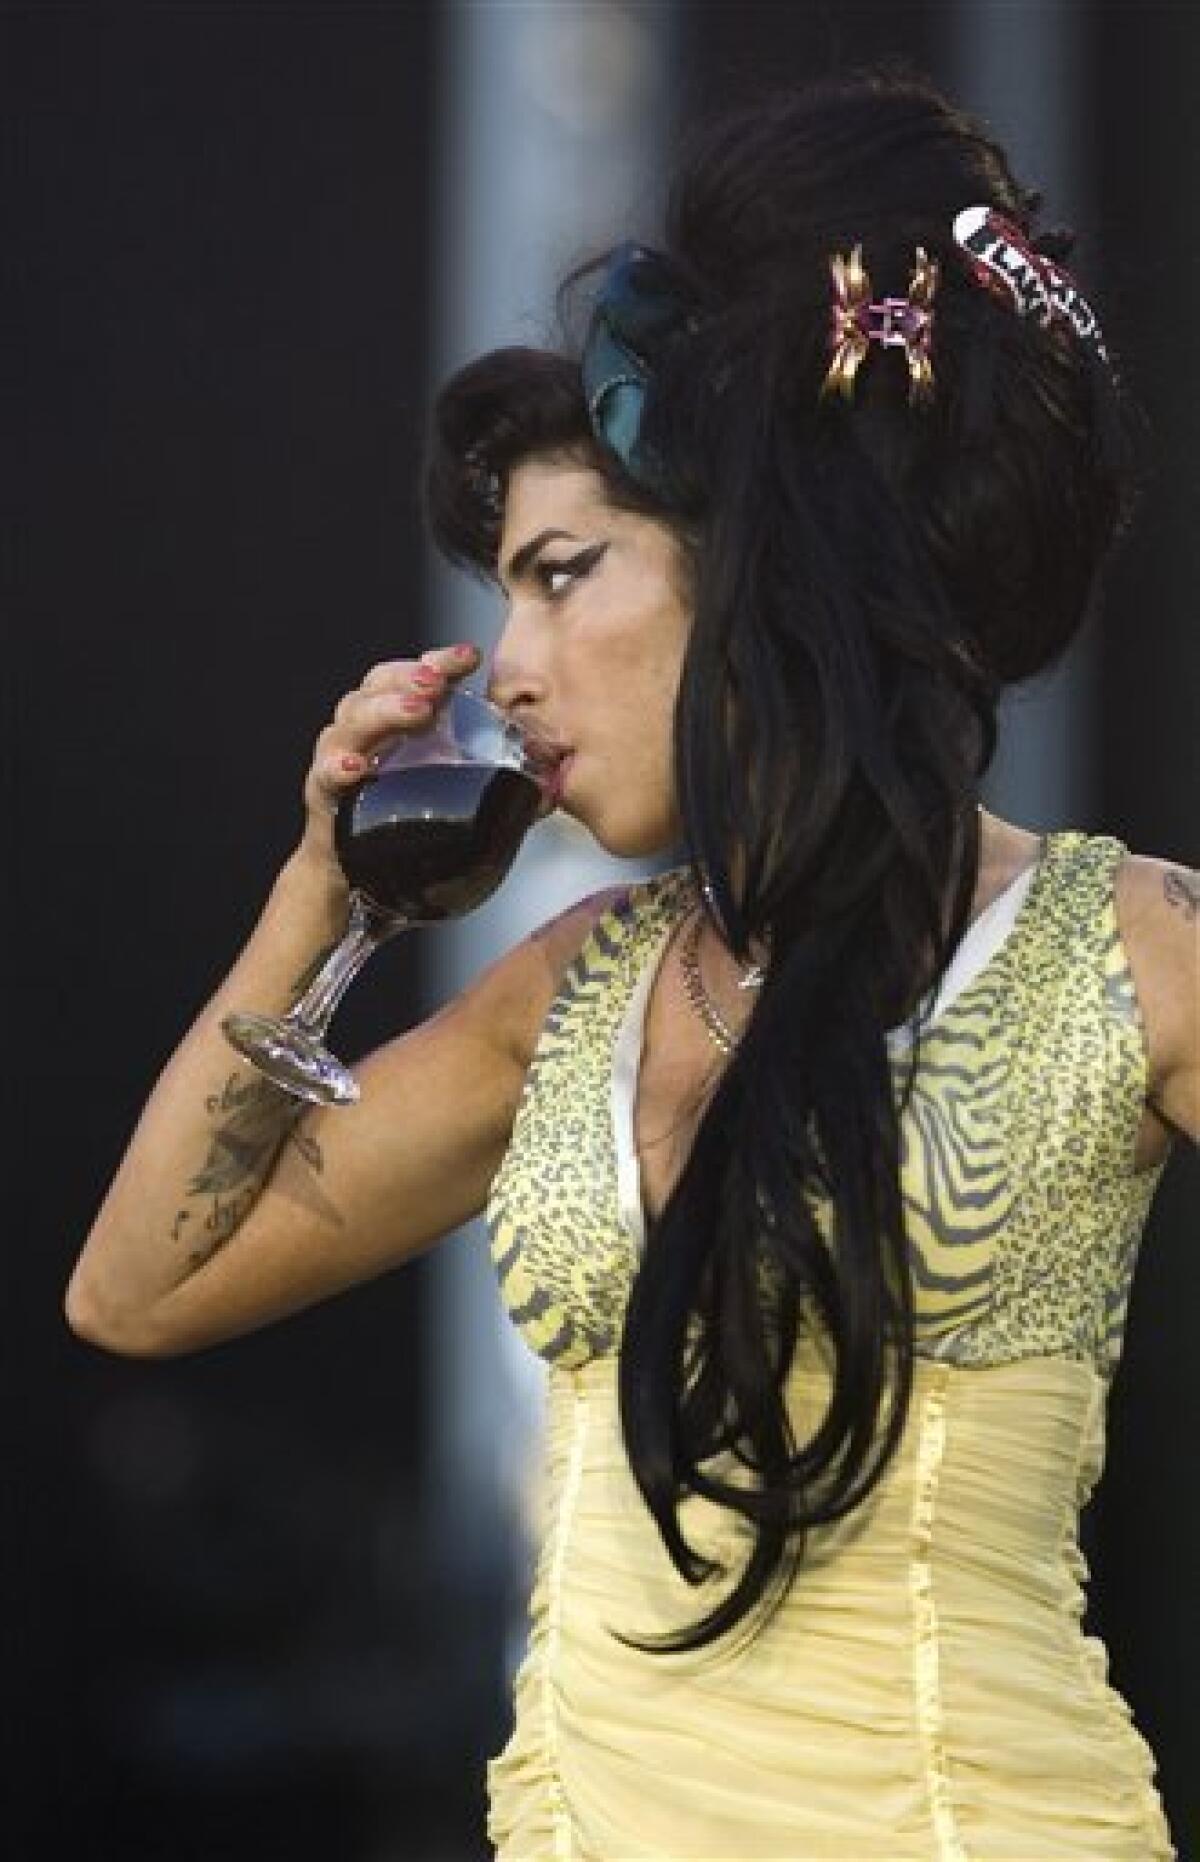 FILE - In this July 4, 2008 file photo, jazz soul singer Amy Winehouse, from England, performs during the Rock in Rio music festival in Arganda del Rey, on the outskirts of Madrid. Winehouse was booed and jeered late Saturday, June 18, 2011, during a concert in Serbia's capital as she stumbled onto the stage, mumbled through her songs and wandered off. (AP Photo/Victor R. Caivano, File) EDITORIAL USE ONLY